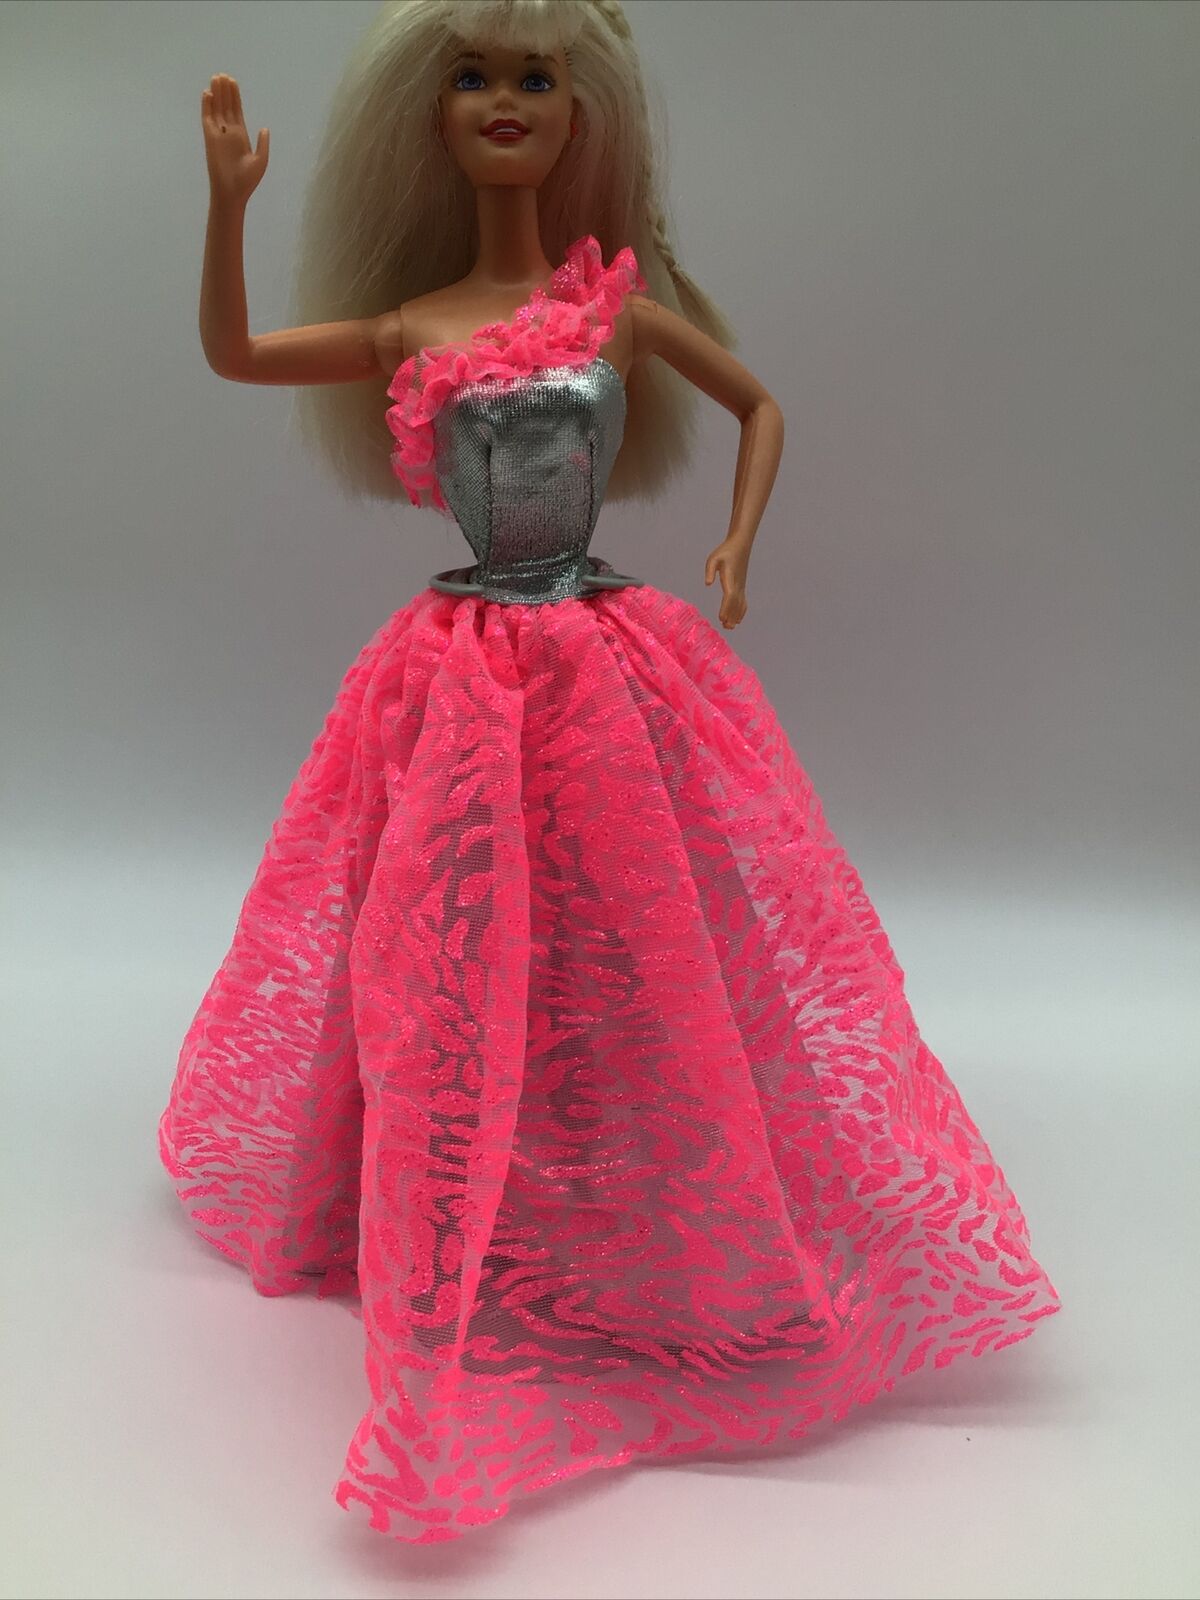 Barbie Looks Collectible Fashion Doll with Sparkly Silver Outfit & Magenta  Curls